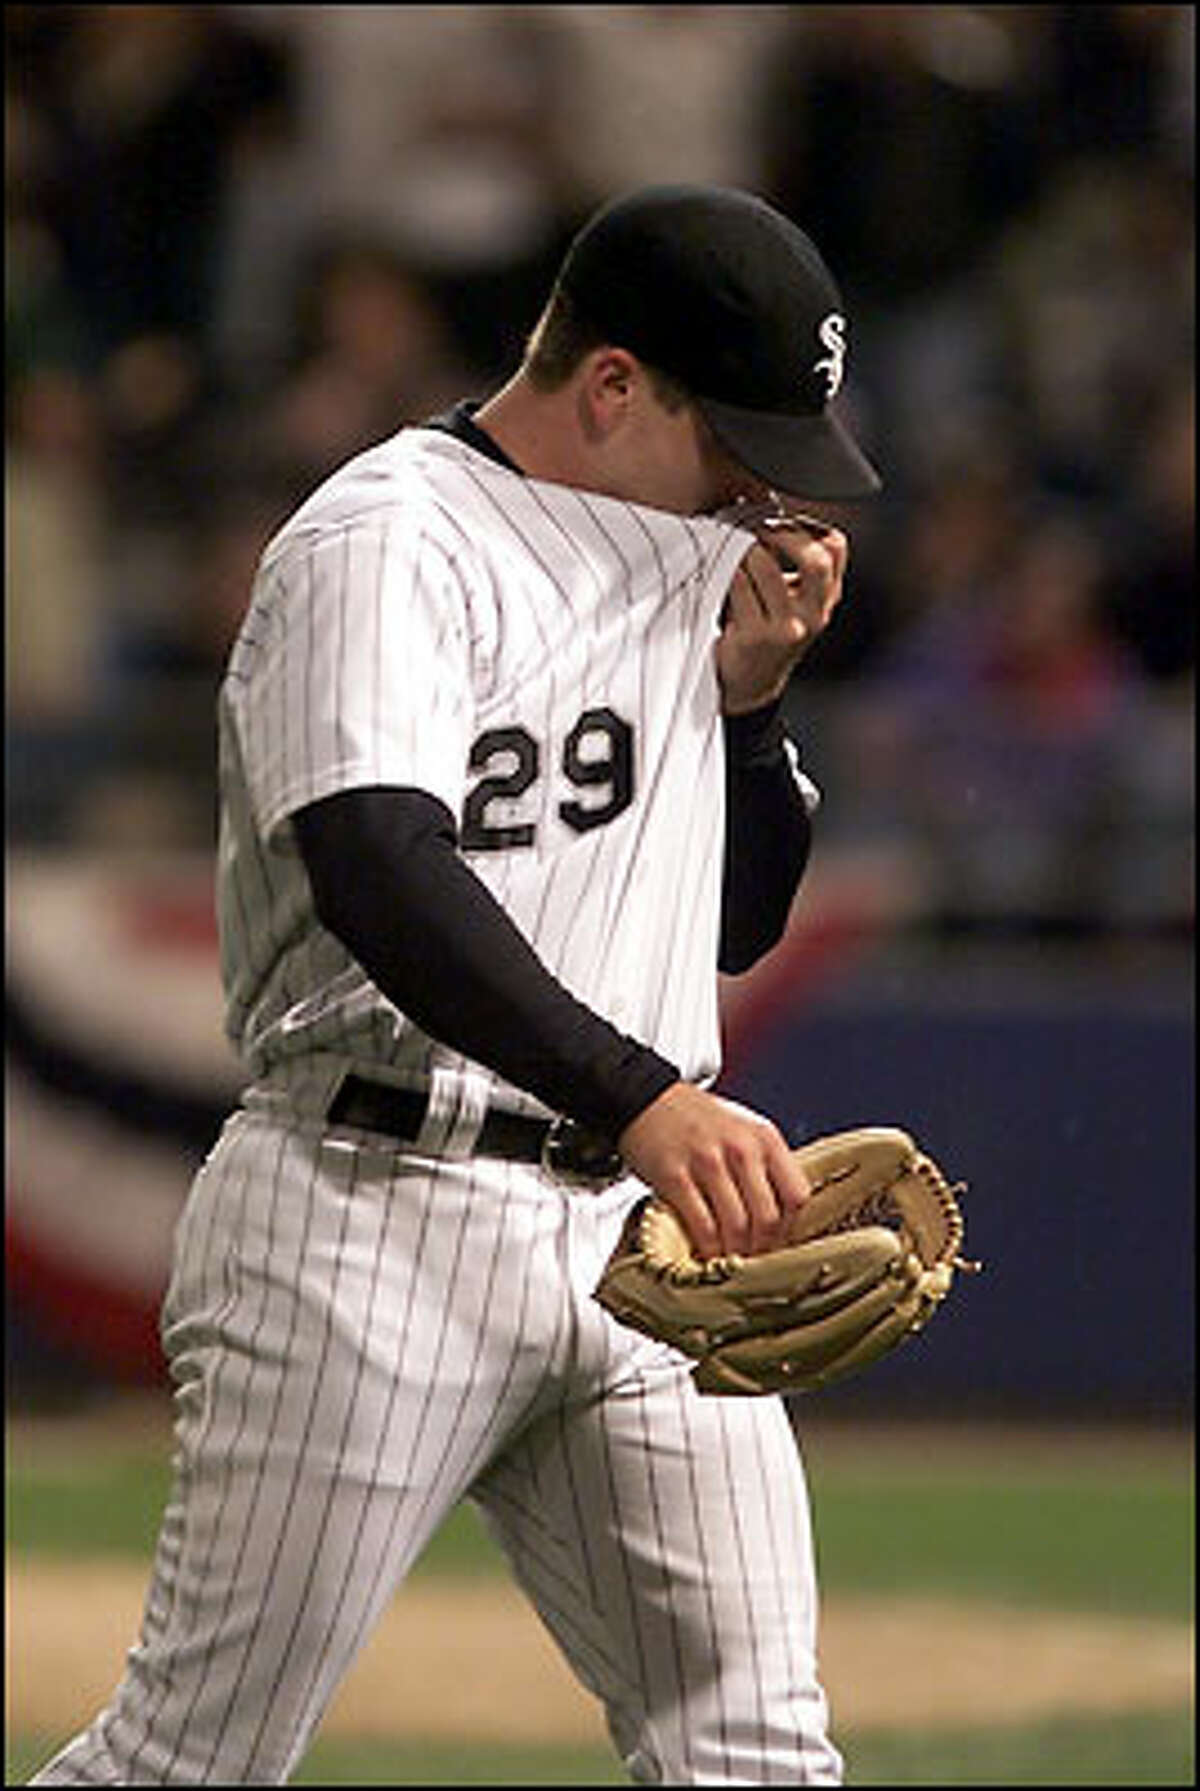 White Sox reliever Keith Foulke leaves the field after giving up three runs in the 10th.